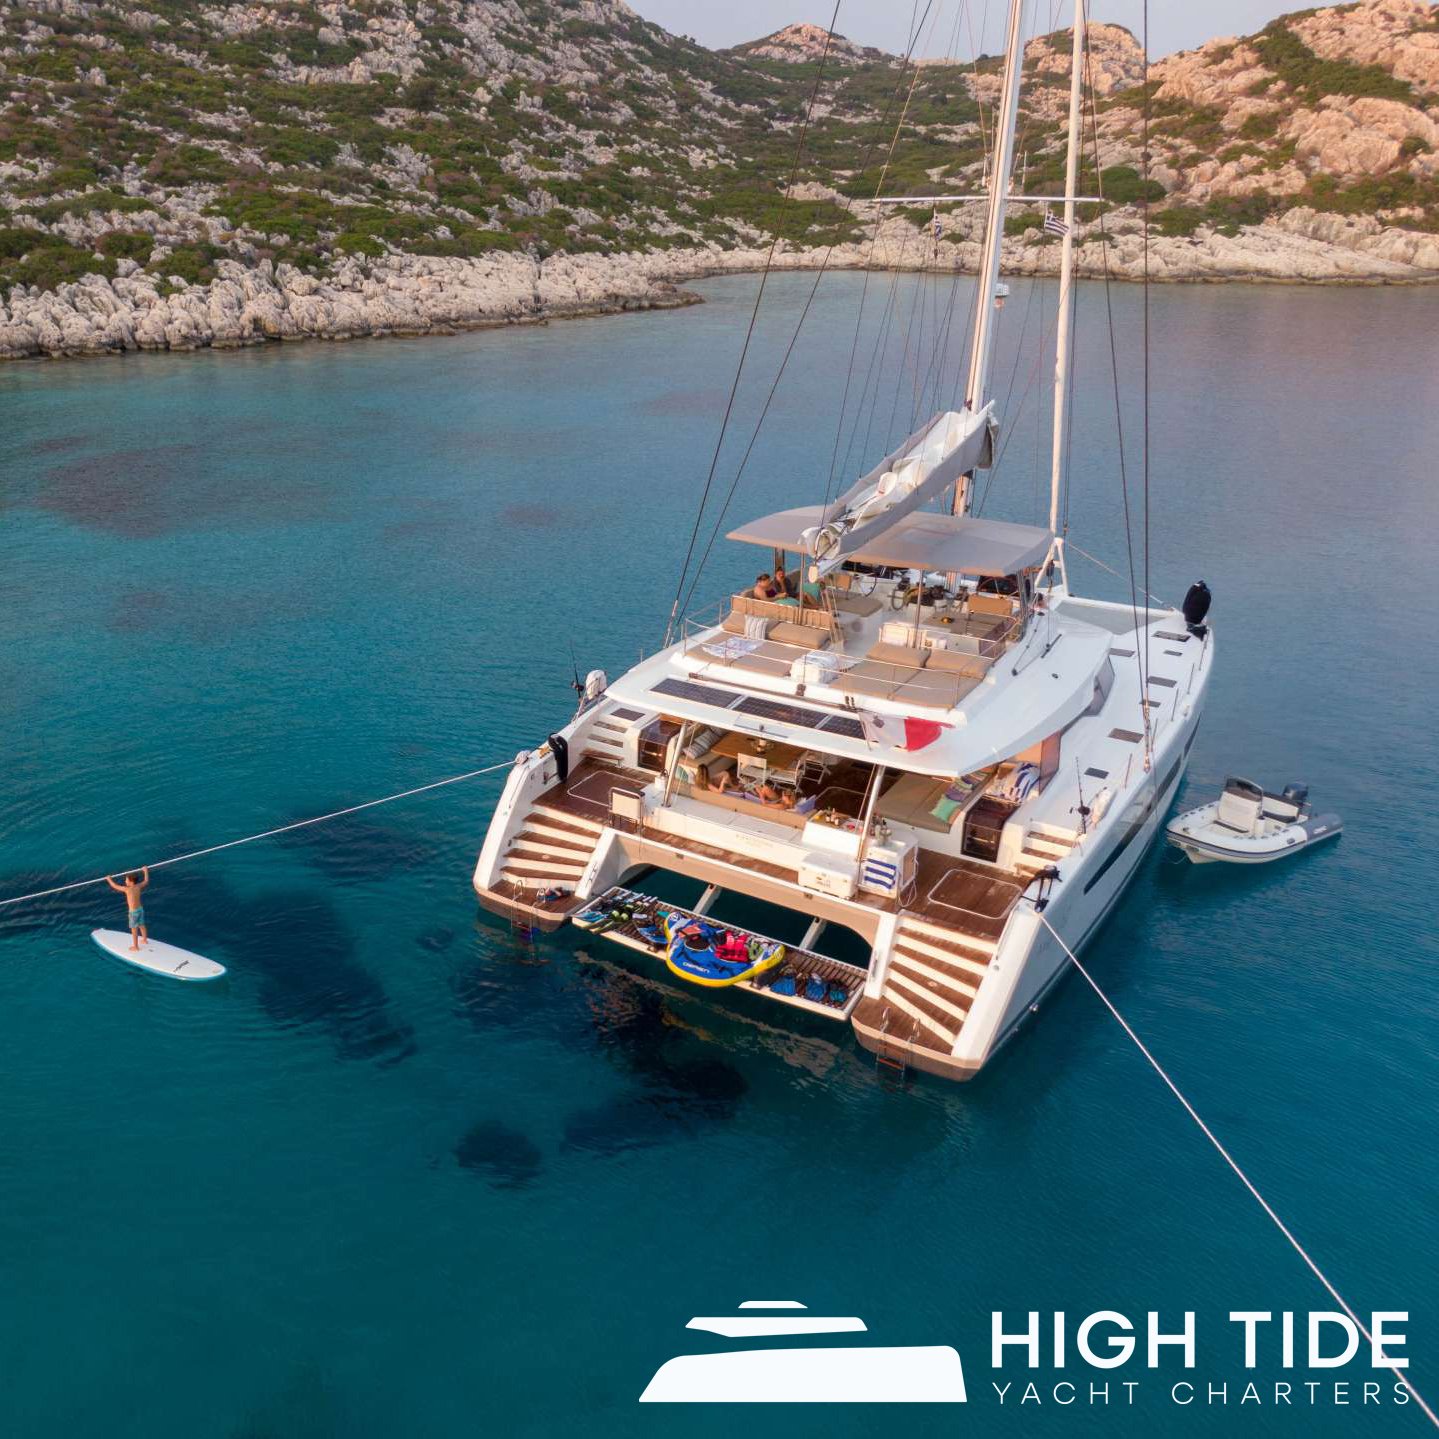 Sail in style aboard the Crewed Fountaine Pajot Algeria 67 SERENISSIMA! Embark on an unforgettable journey from Athens, Greece, and explore the stunning Aegean Sea. With luxury amenities and a dedicated crew, every moment is crafted to perfection.

C